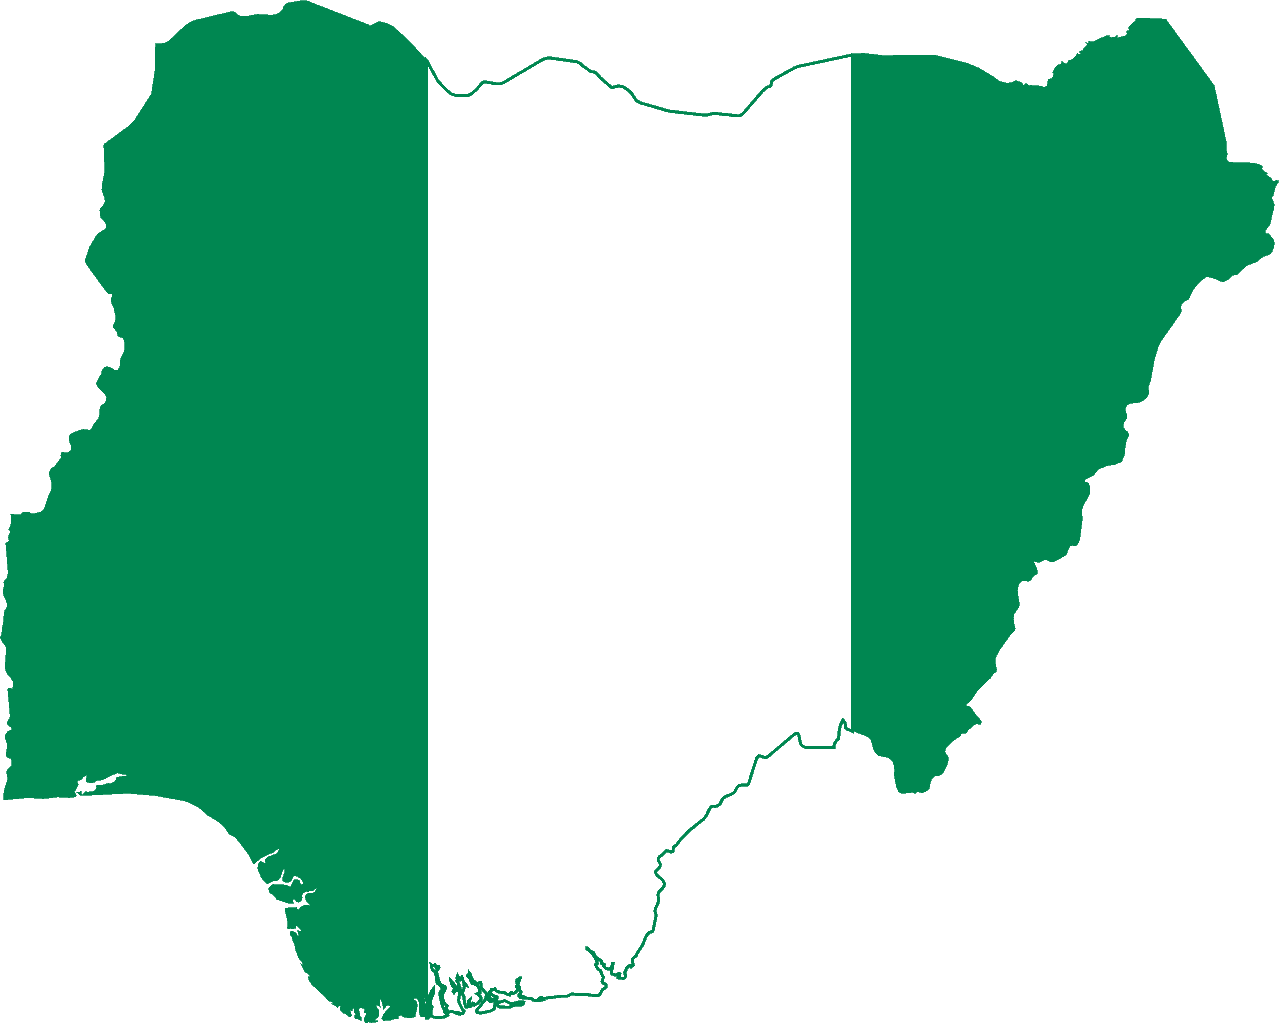 the green and white flag of Nigeria overlaying the country's shape